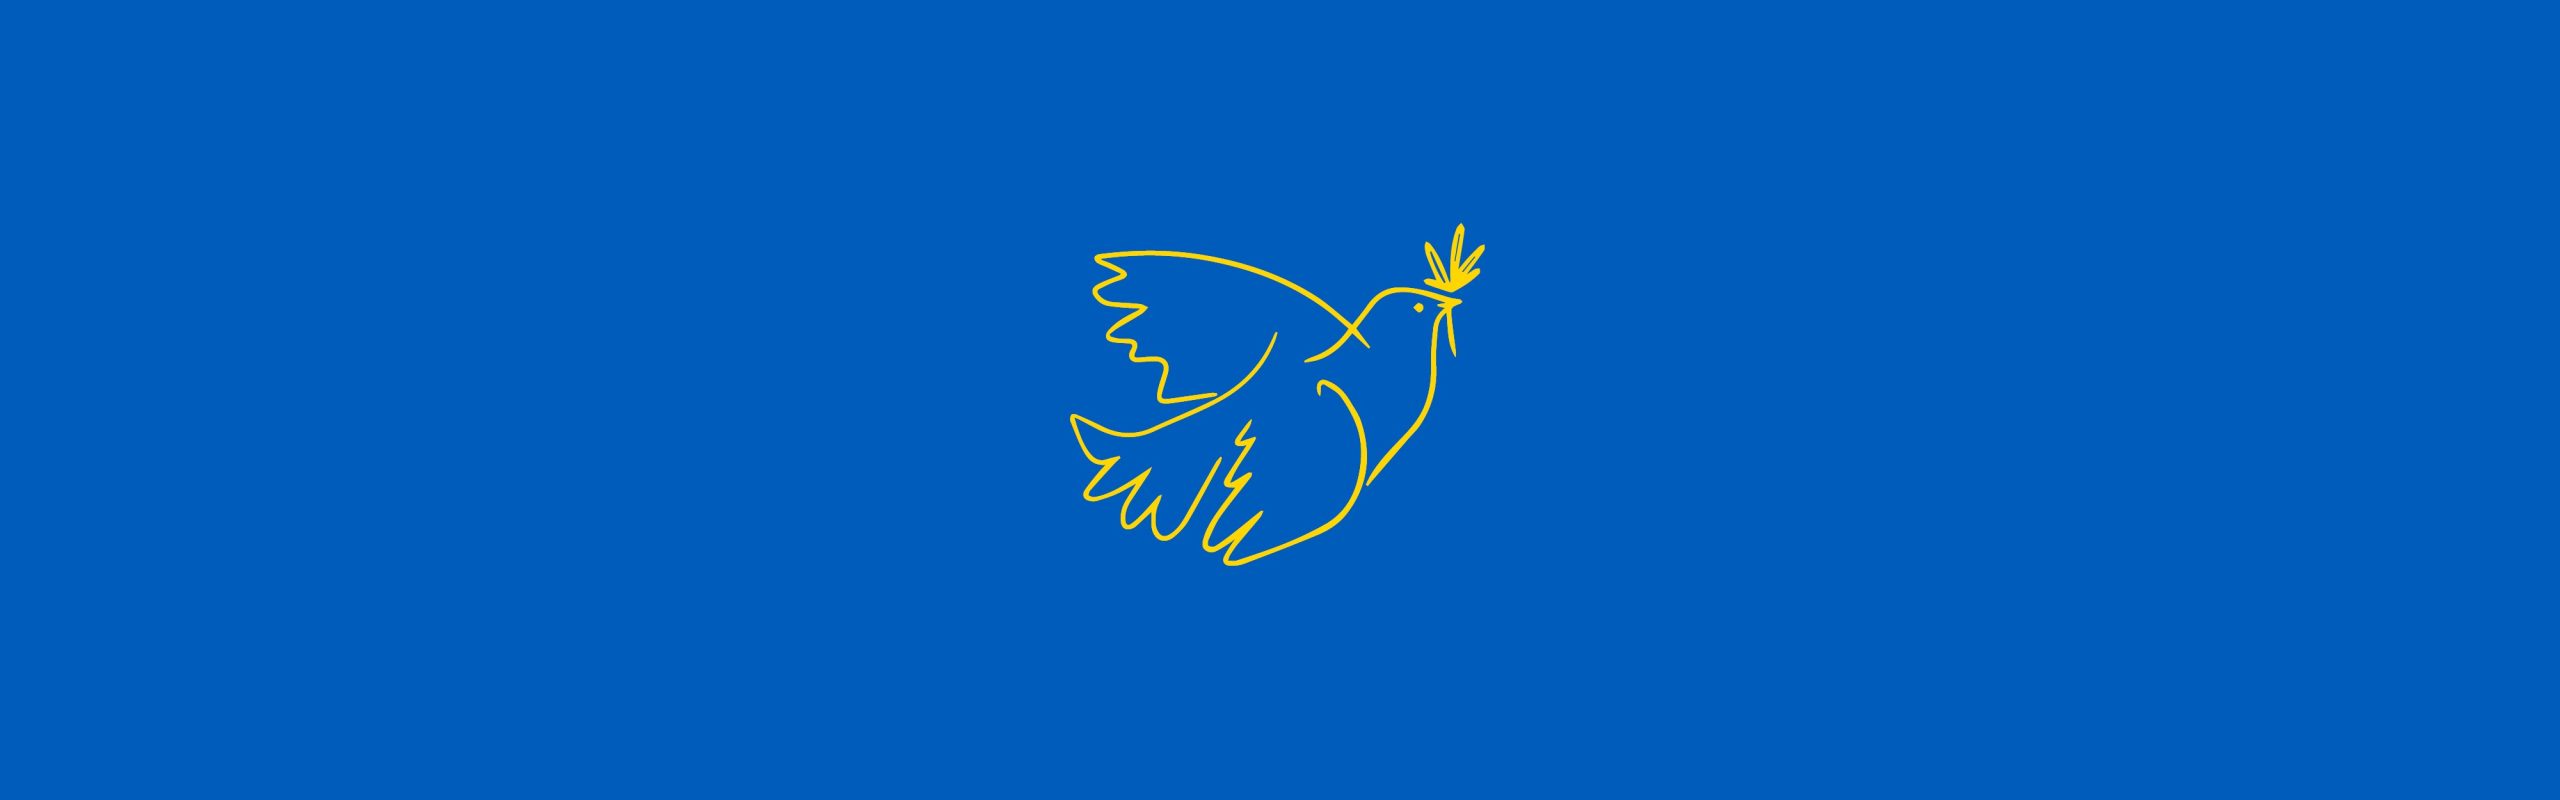 golden peace dove on blue background